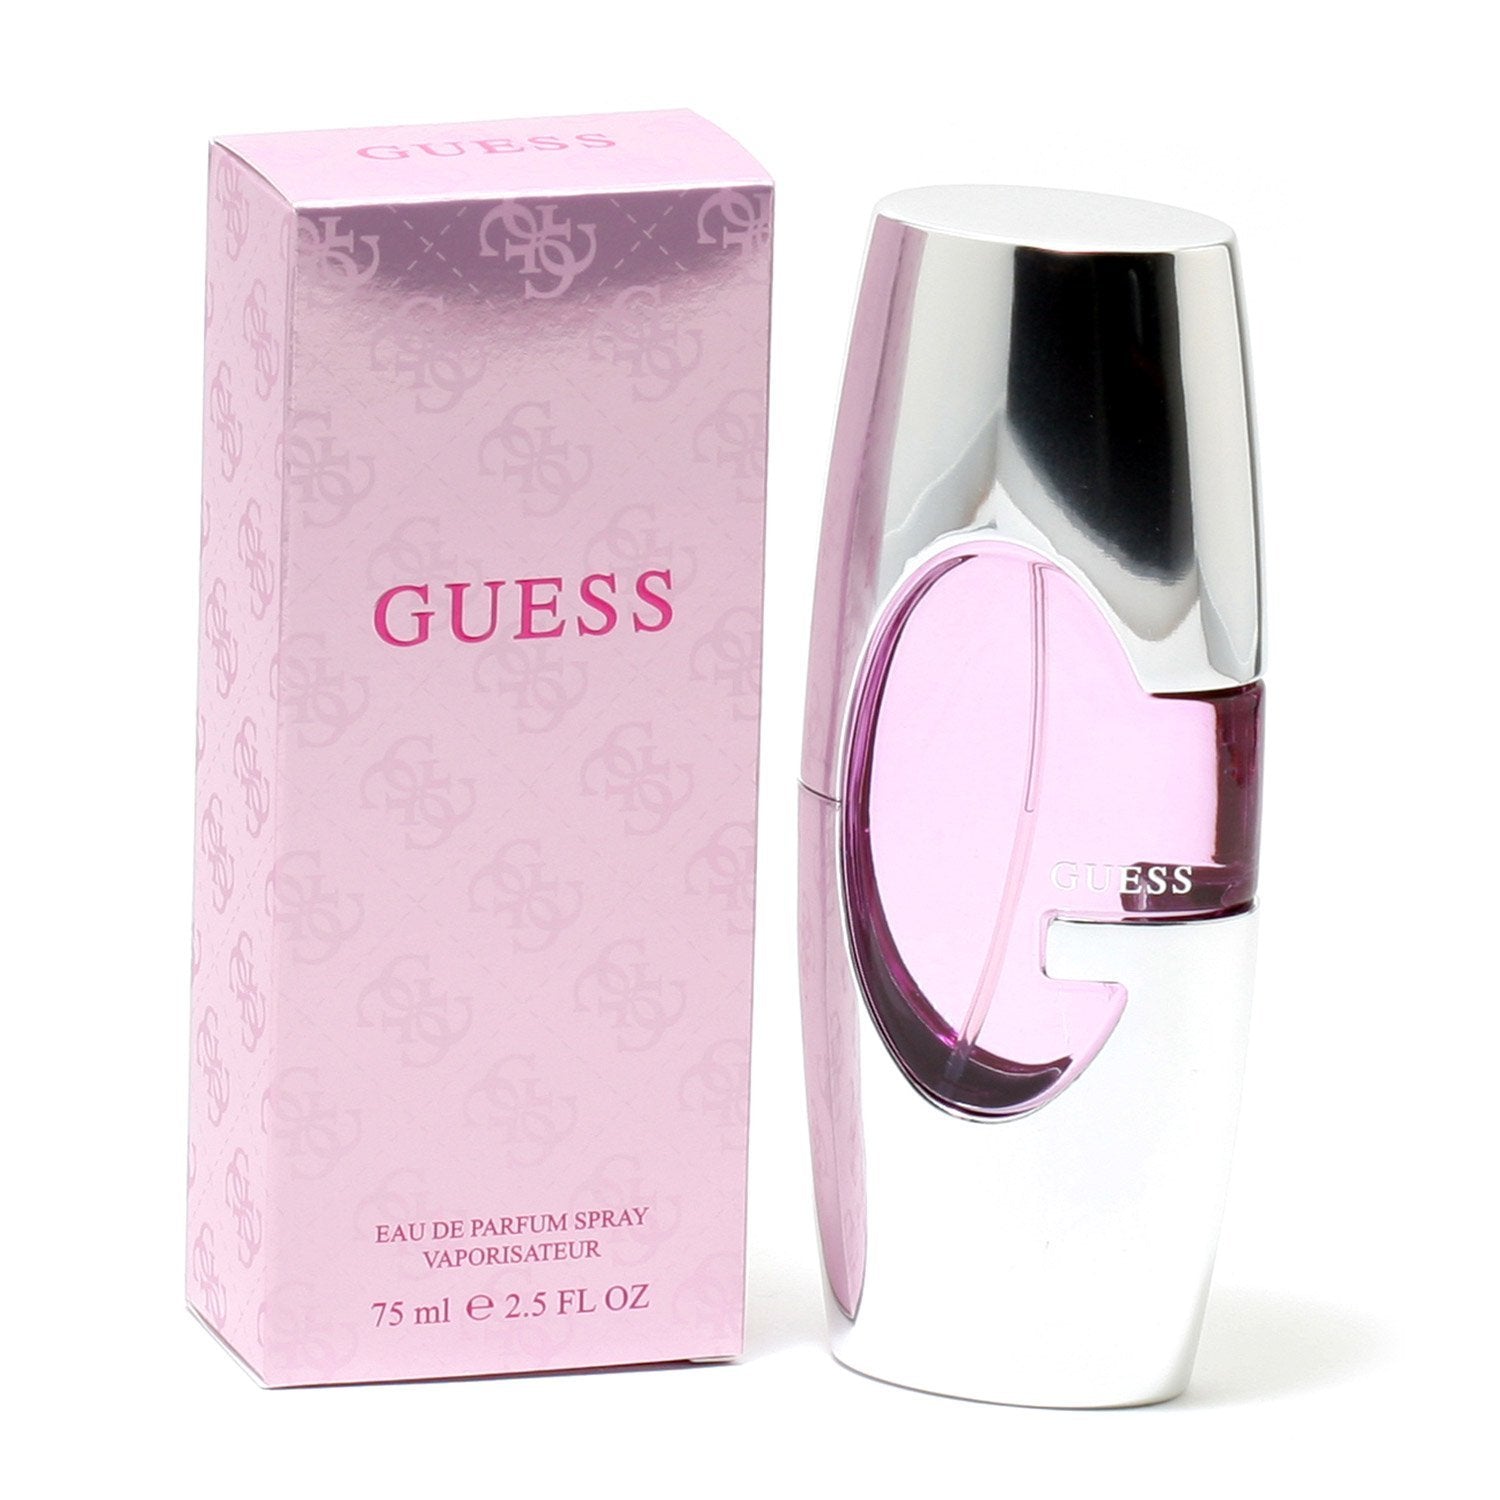 Guess By Marciano Guess perfume - a fragrance for women